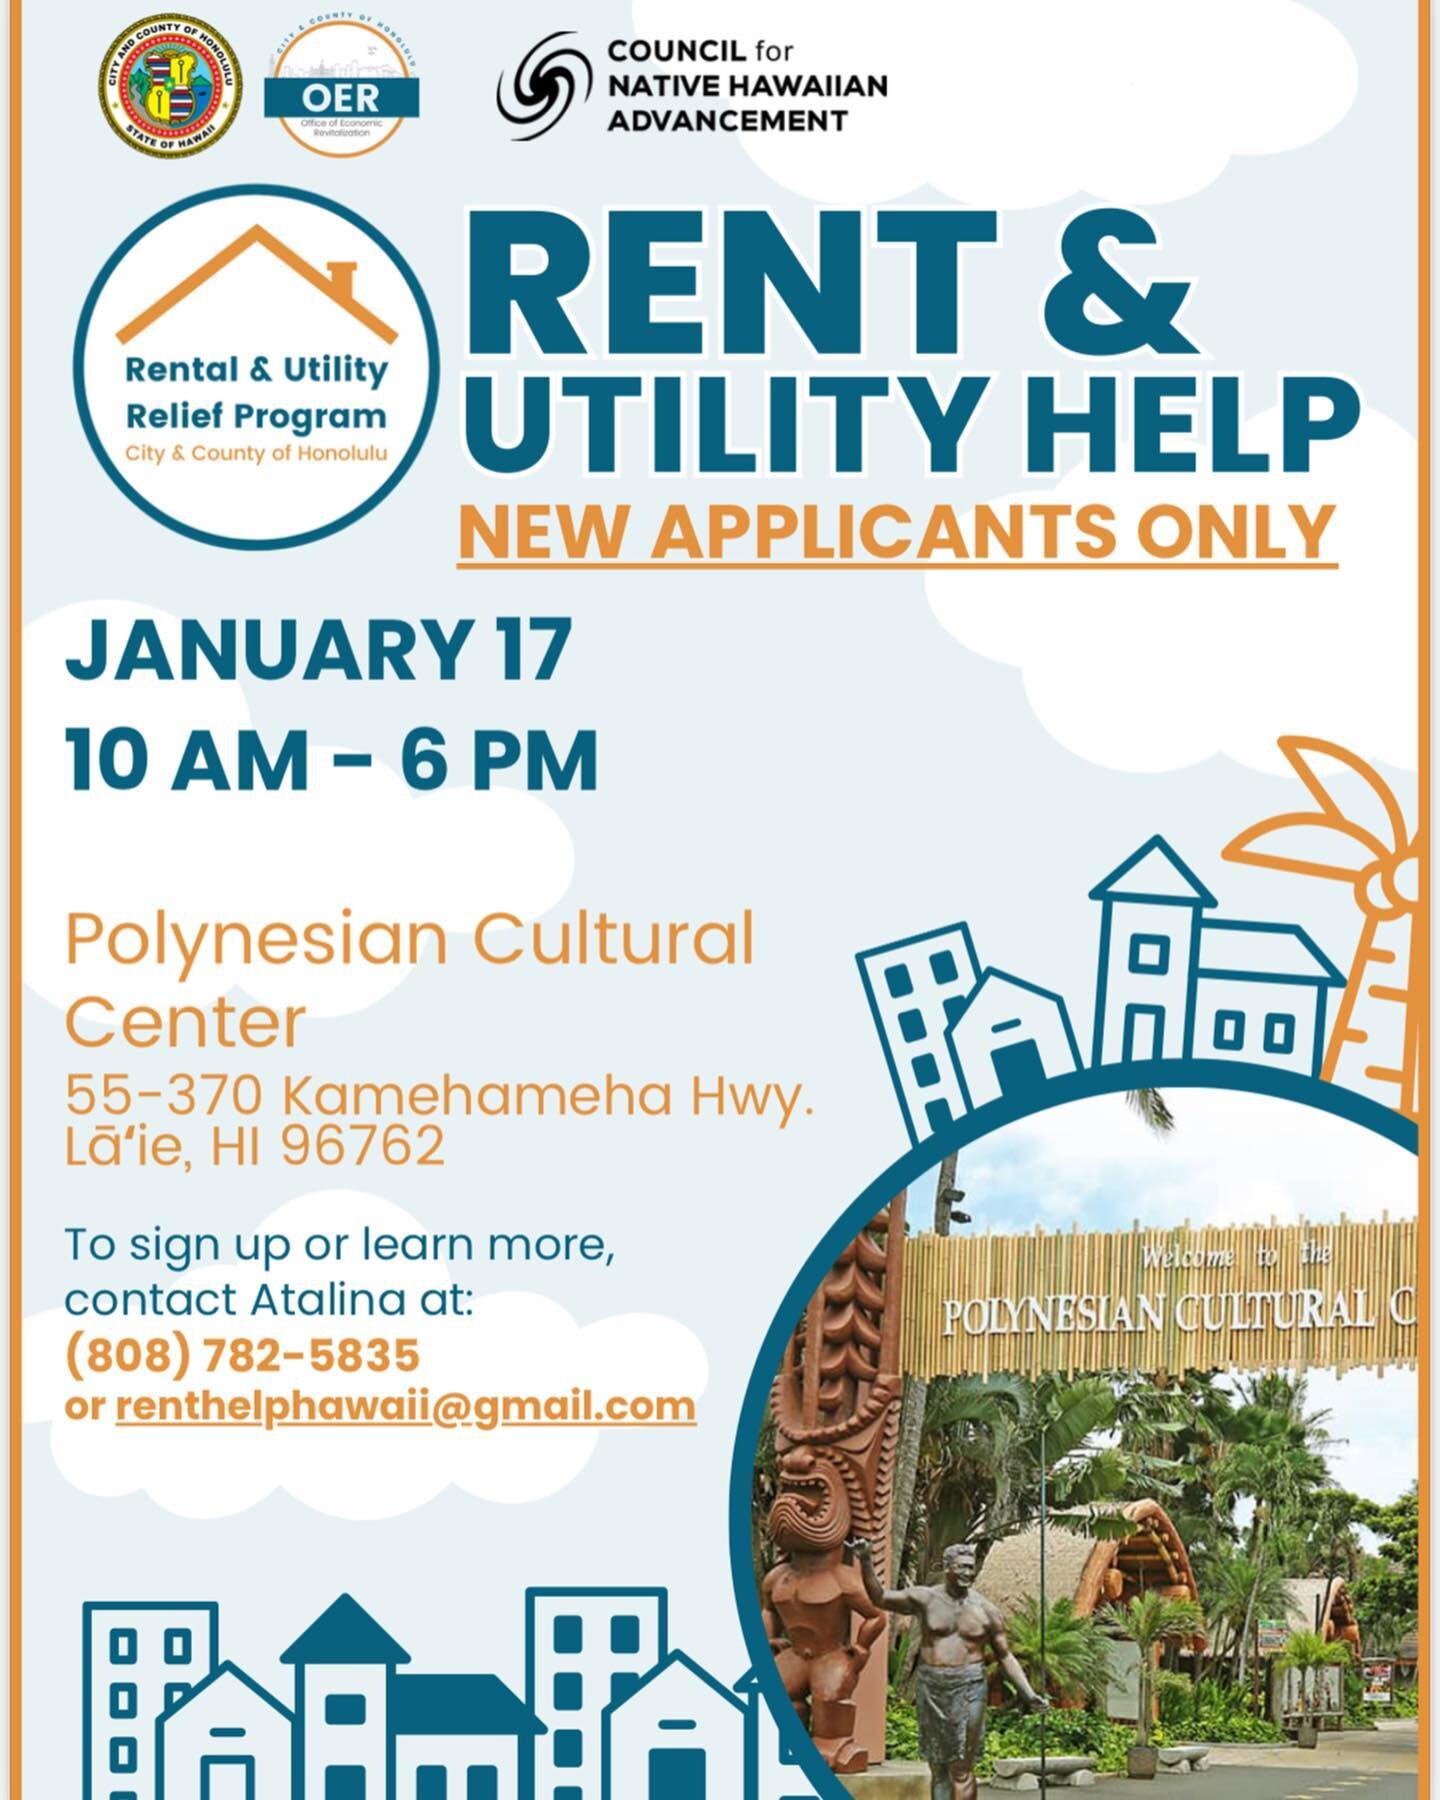 In need of assistance covering your rent and utility expenses? Here&rsquo;s another opportunity at the Polynesian Cultural Center TOMORROW (Jan. 17th)  please sign-up with Atalina at (808) 782-5835 or via email at renthelphawaii@gmail.com 🌺 
➡️ Swip